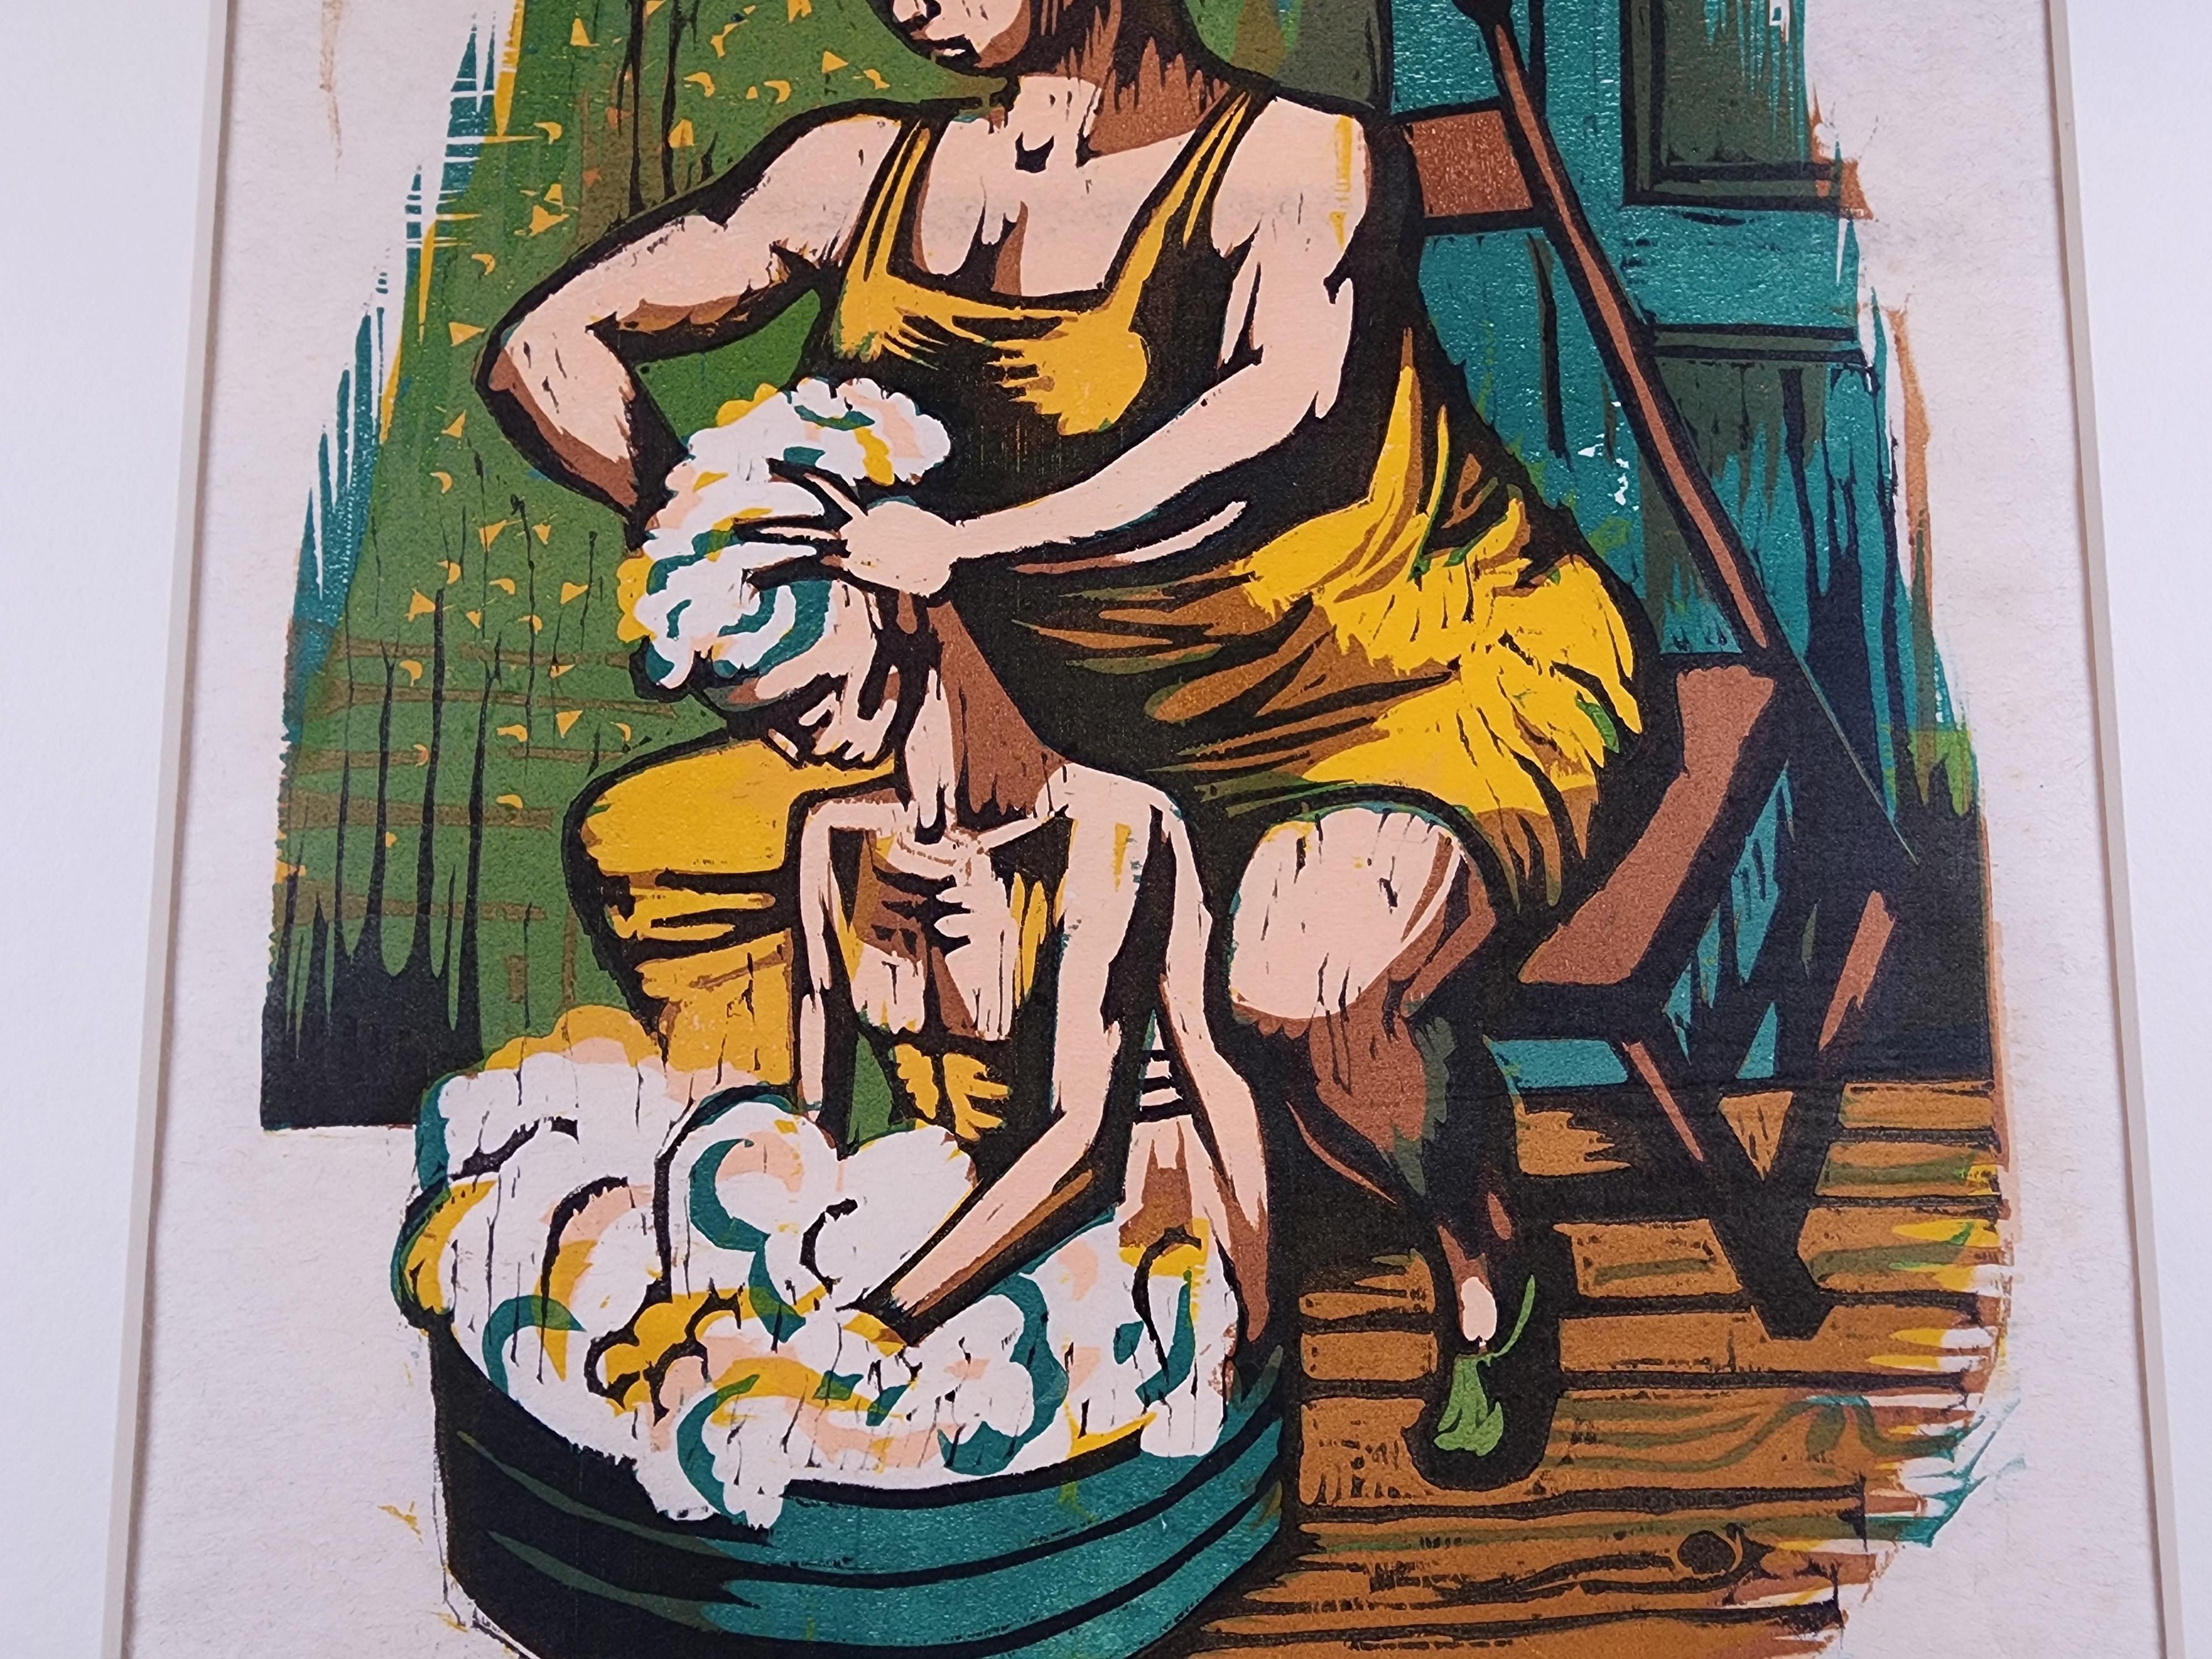 RgrFineArts is pleased to offer this New York WPA color woodcut by Paul Weller titled Shampoo.
The WPA label is affixed to the margin on the reverse of the print.
